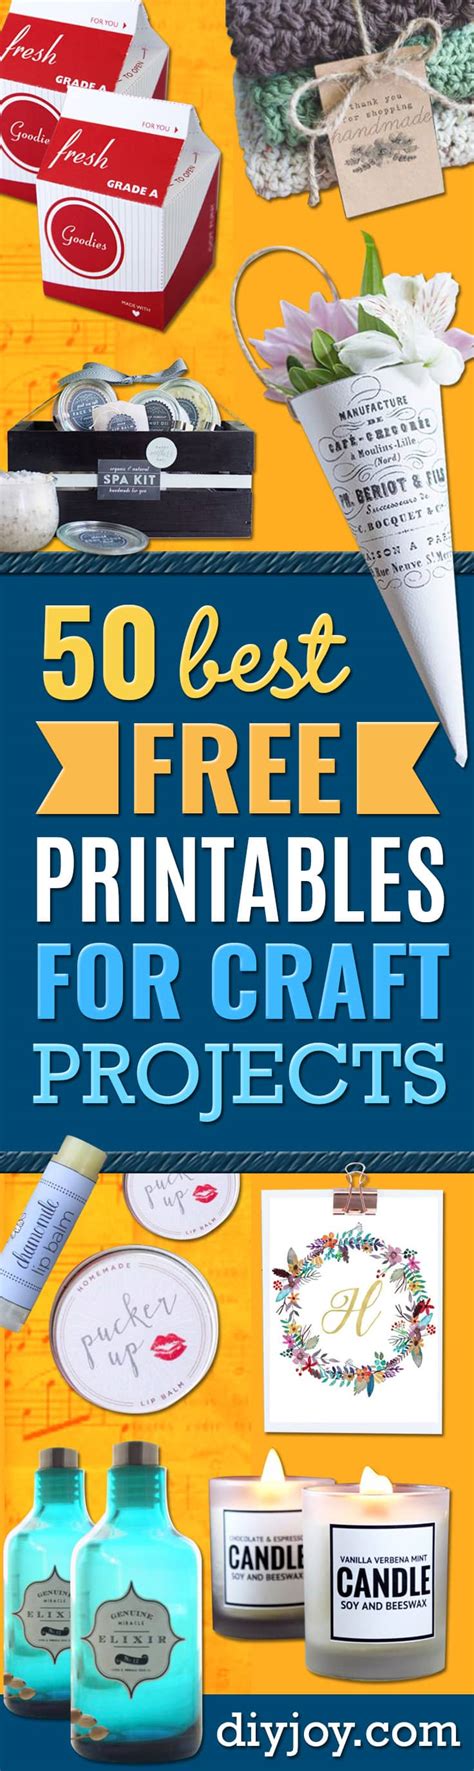 printables  craft projects